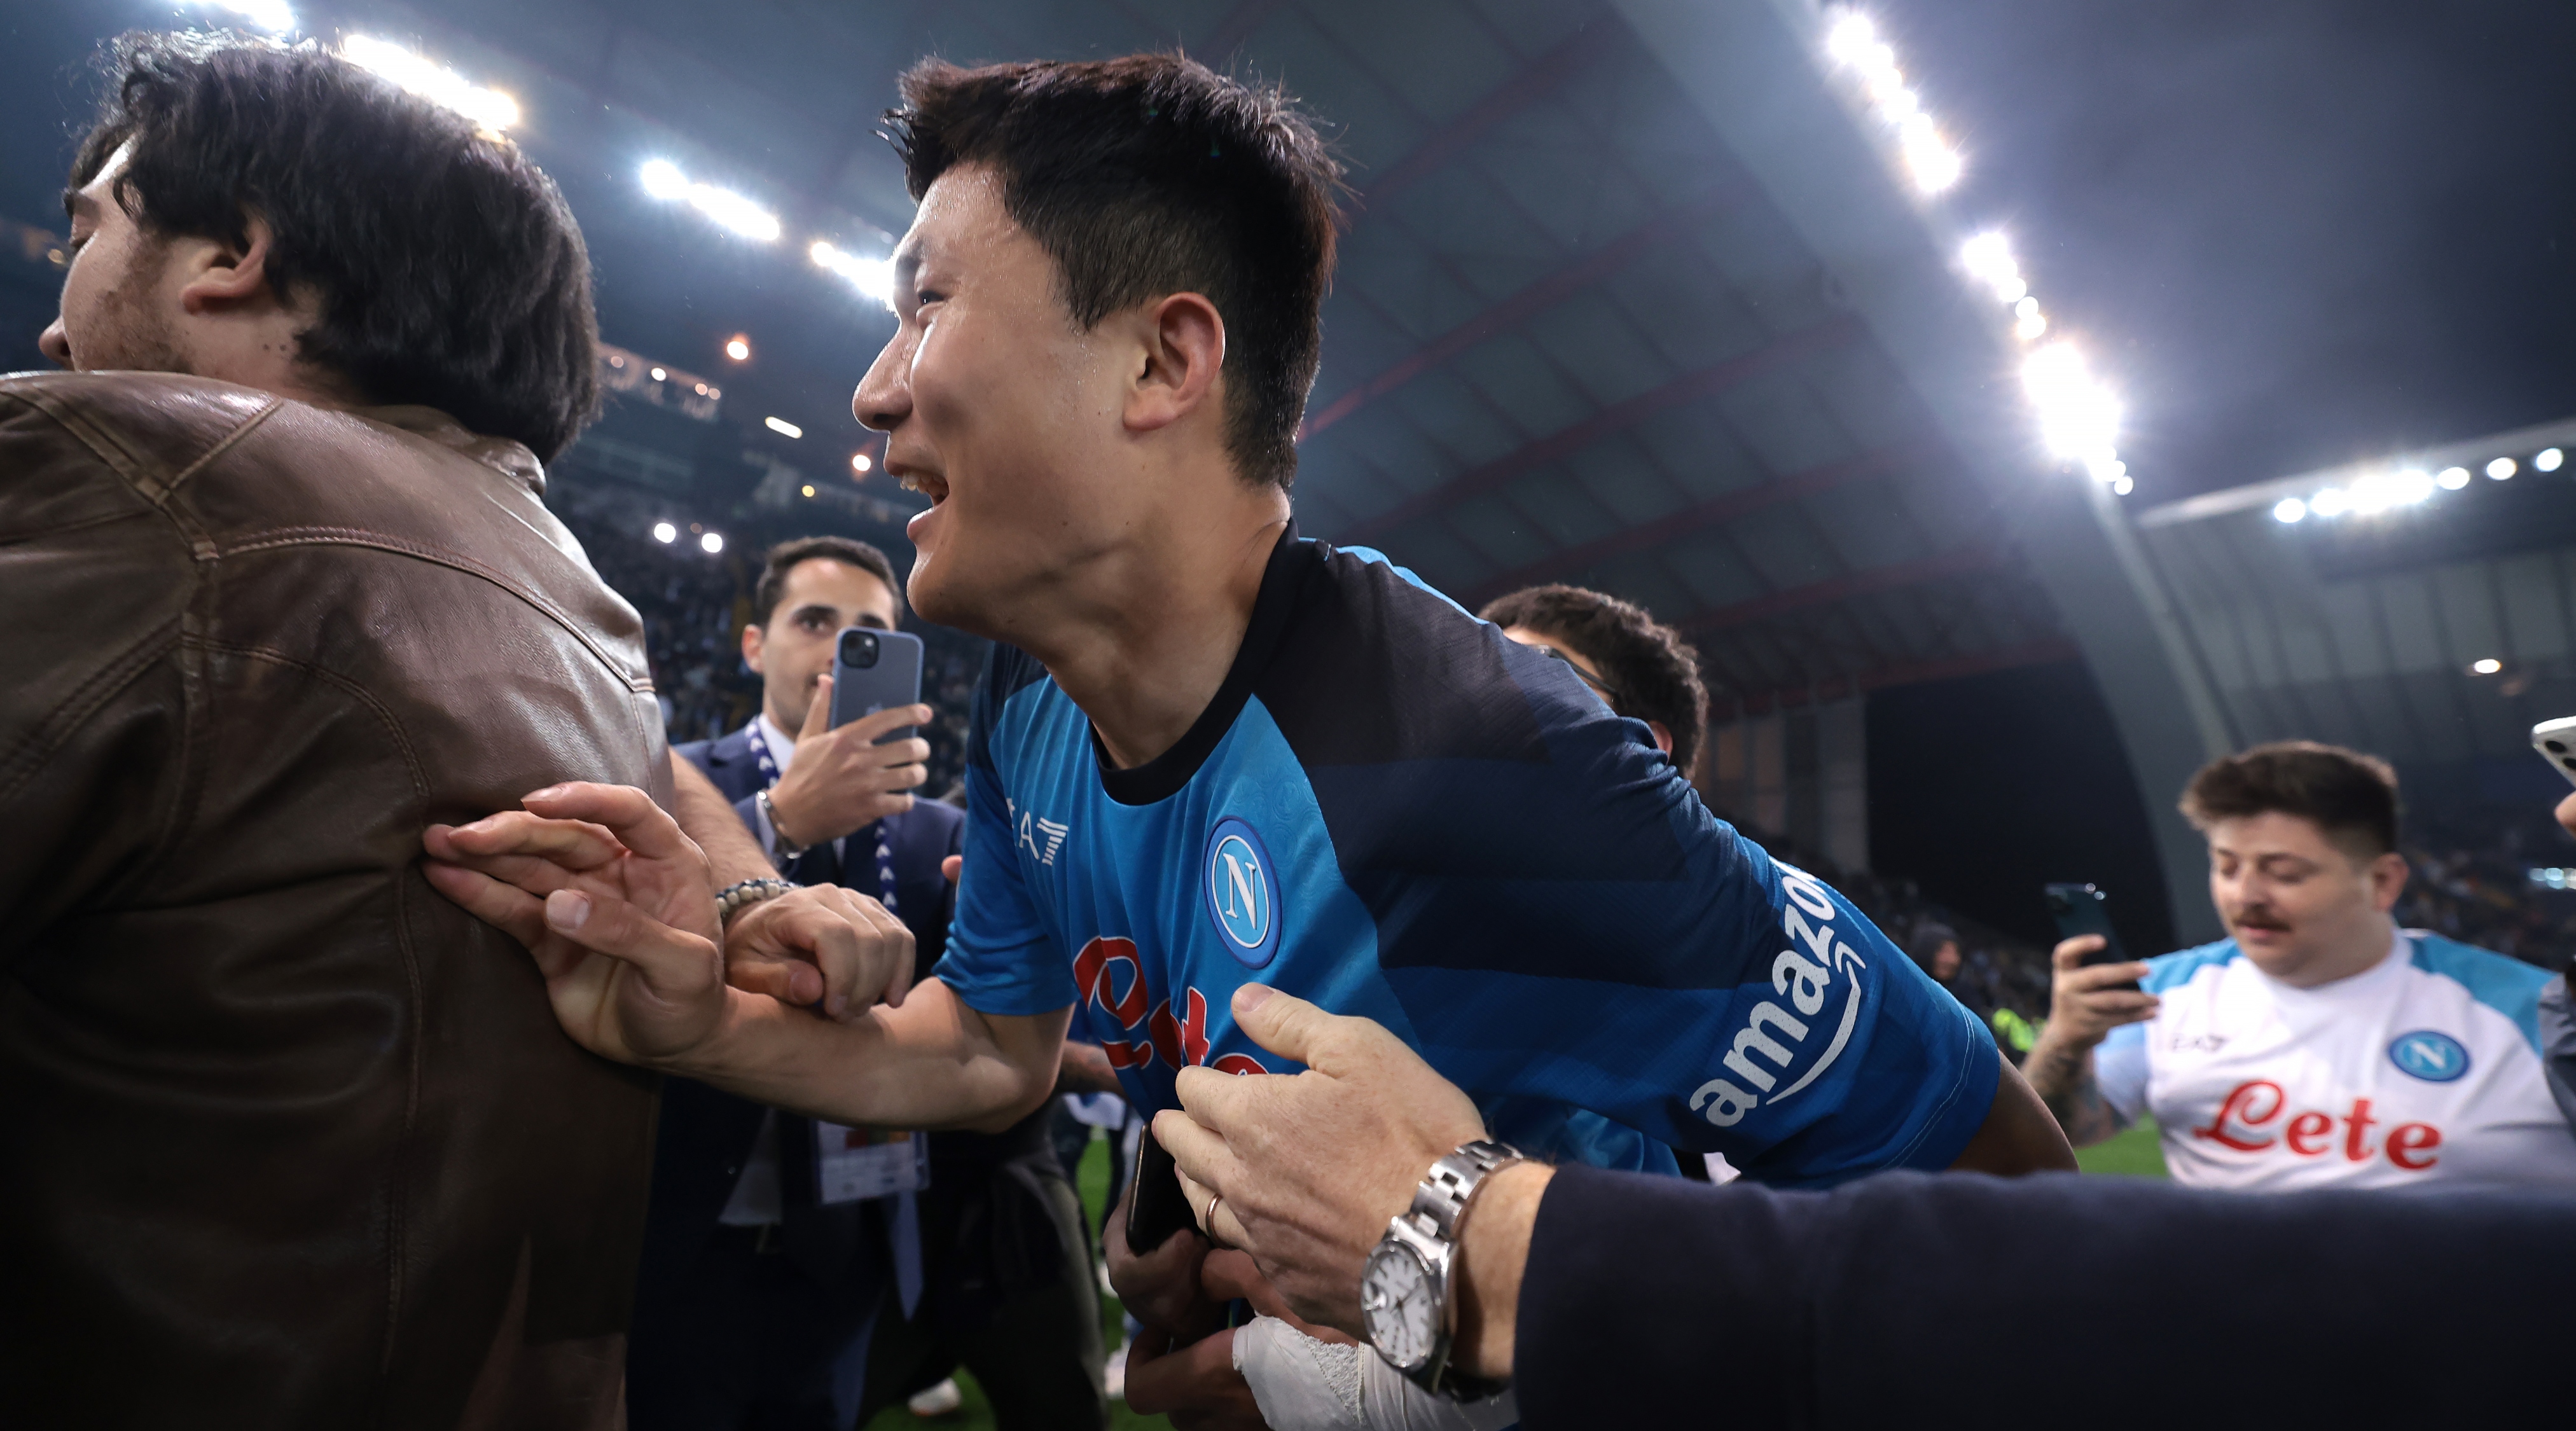 Kim Min-jae of Napoli celebrates with fans on the pitch at full-time of the Serie A match between Udinese and Napoli at the Dacia Arena on May 4 in Udine, Italy.